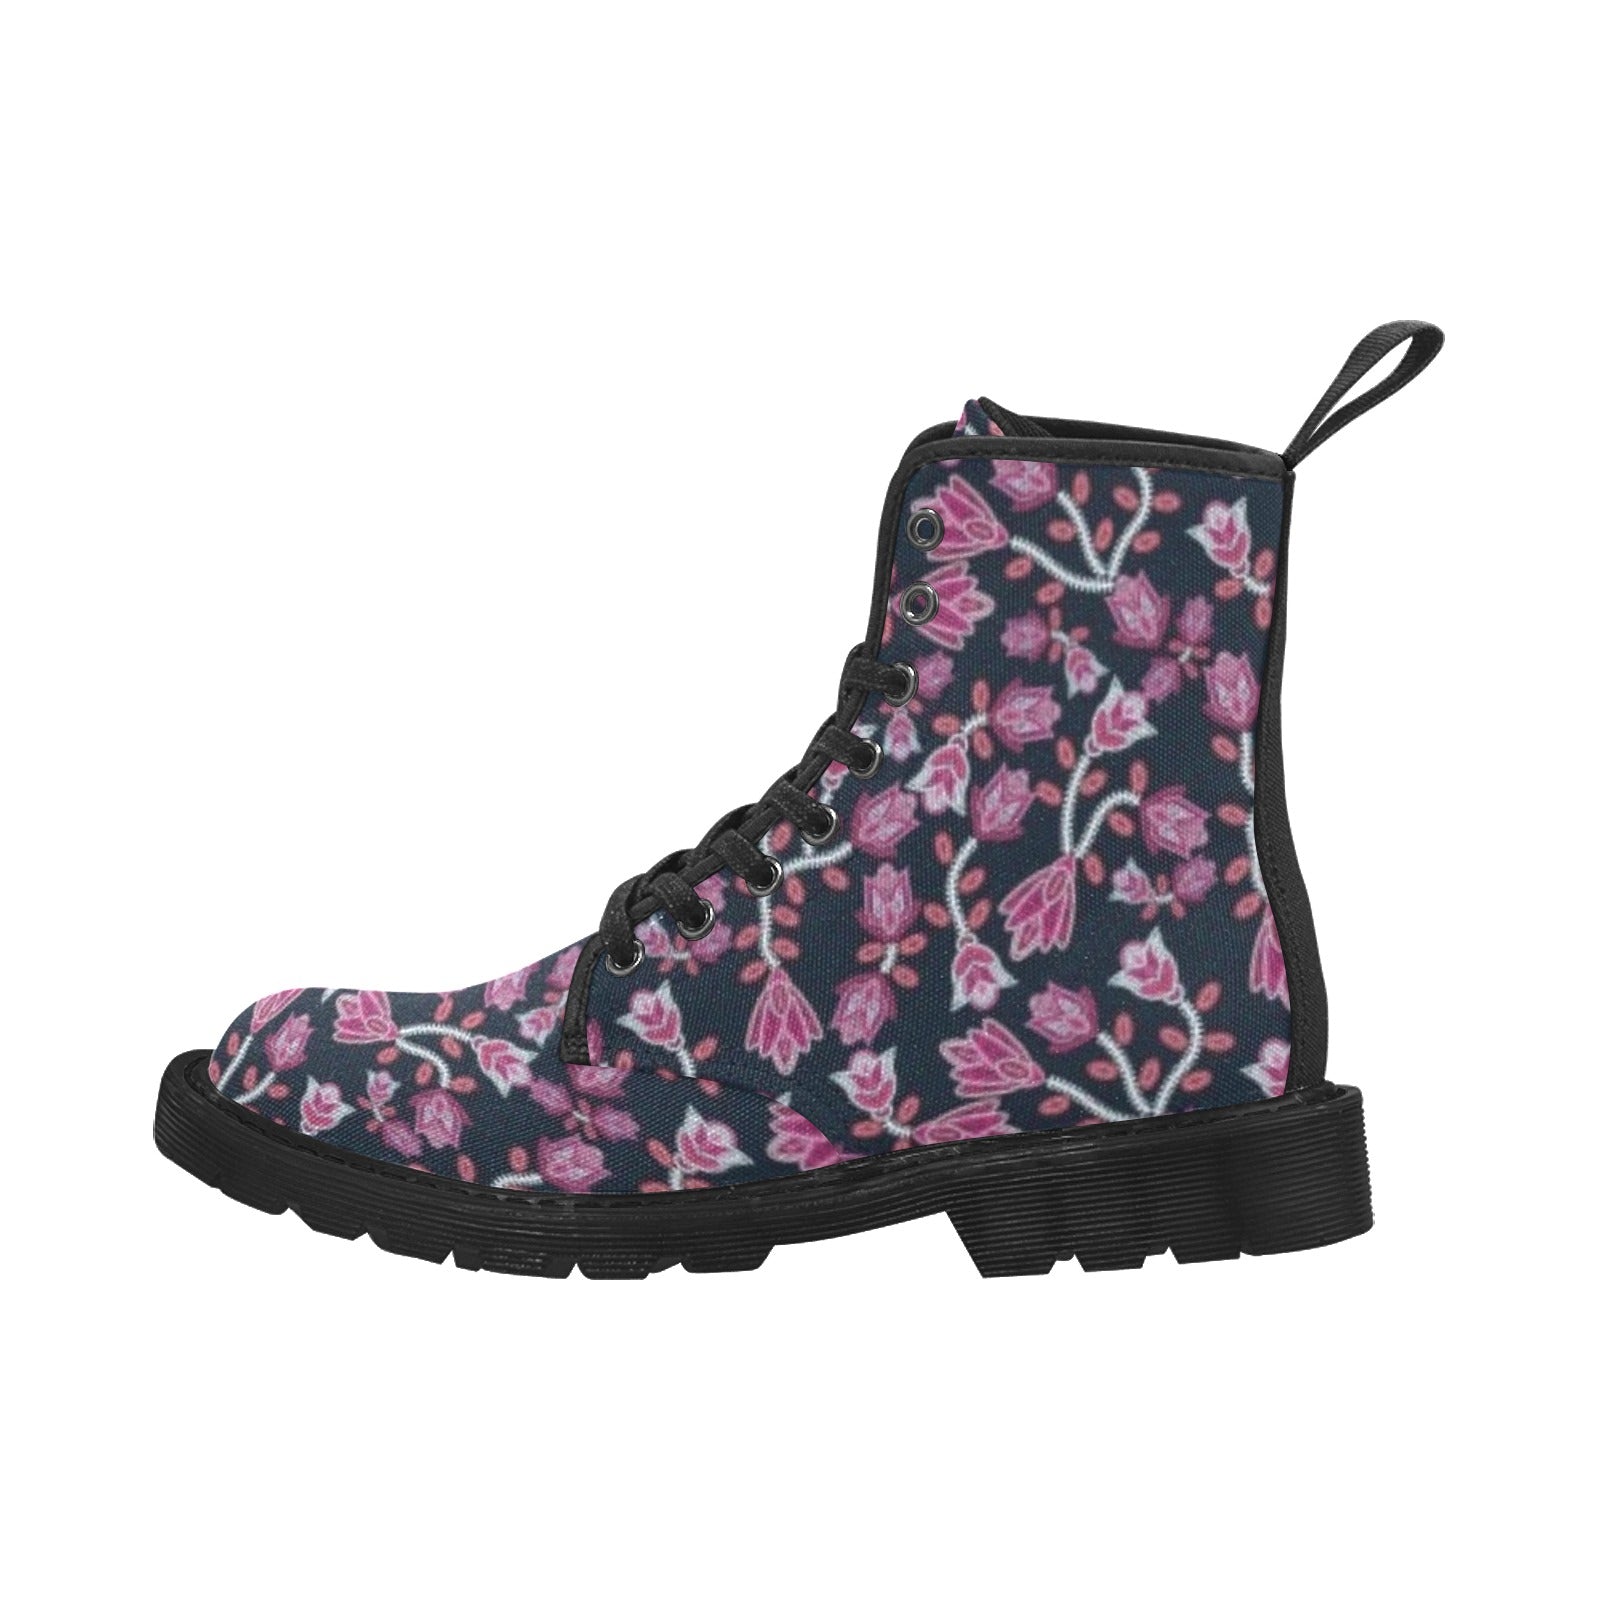 Beaded Pink Boots for Men (Black)